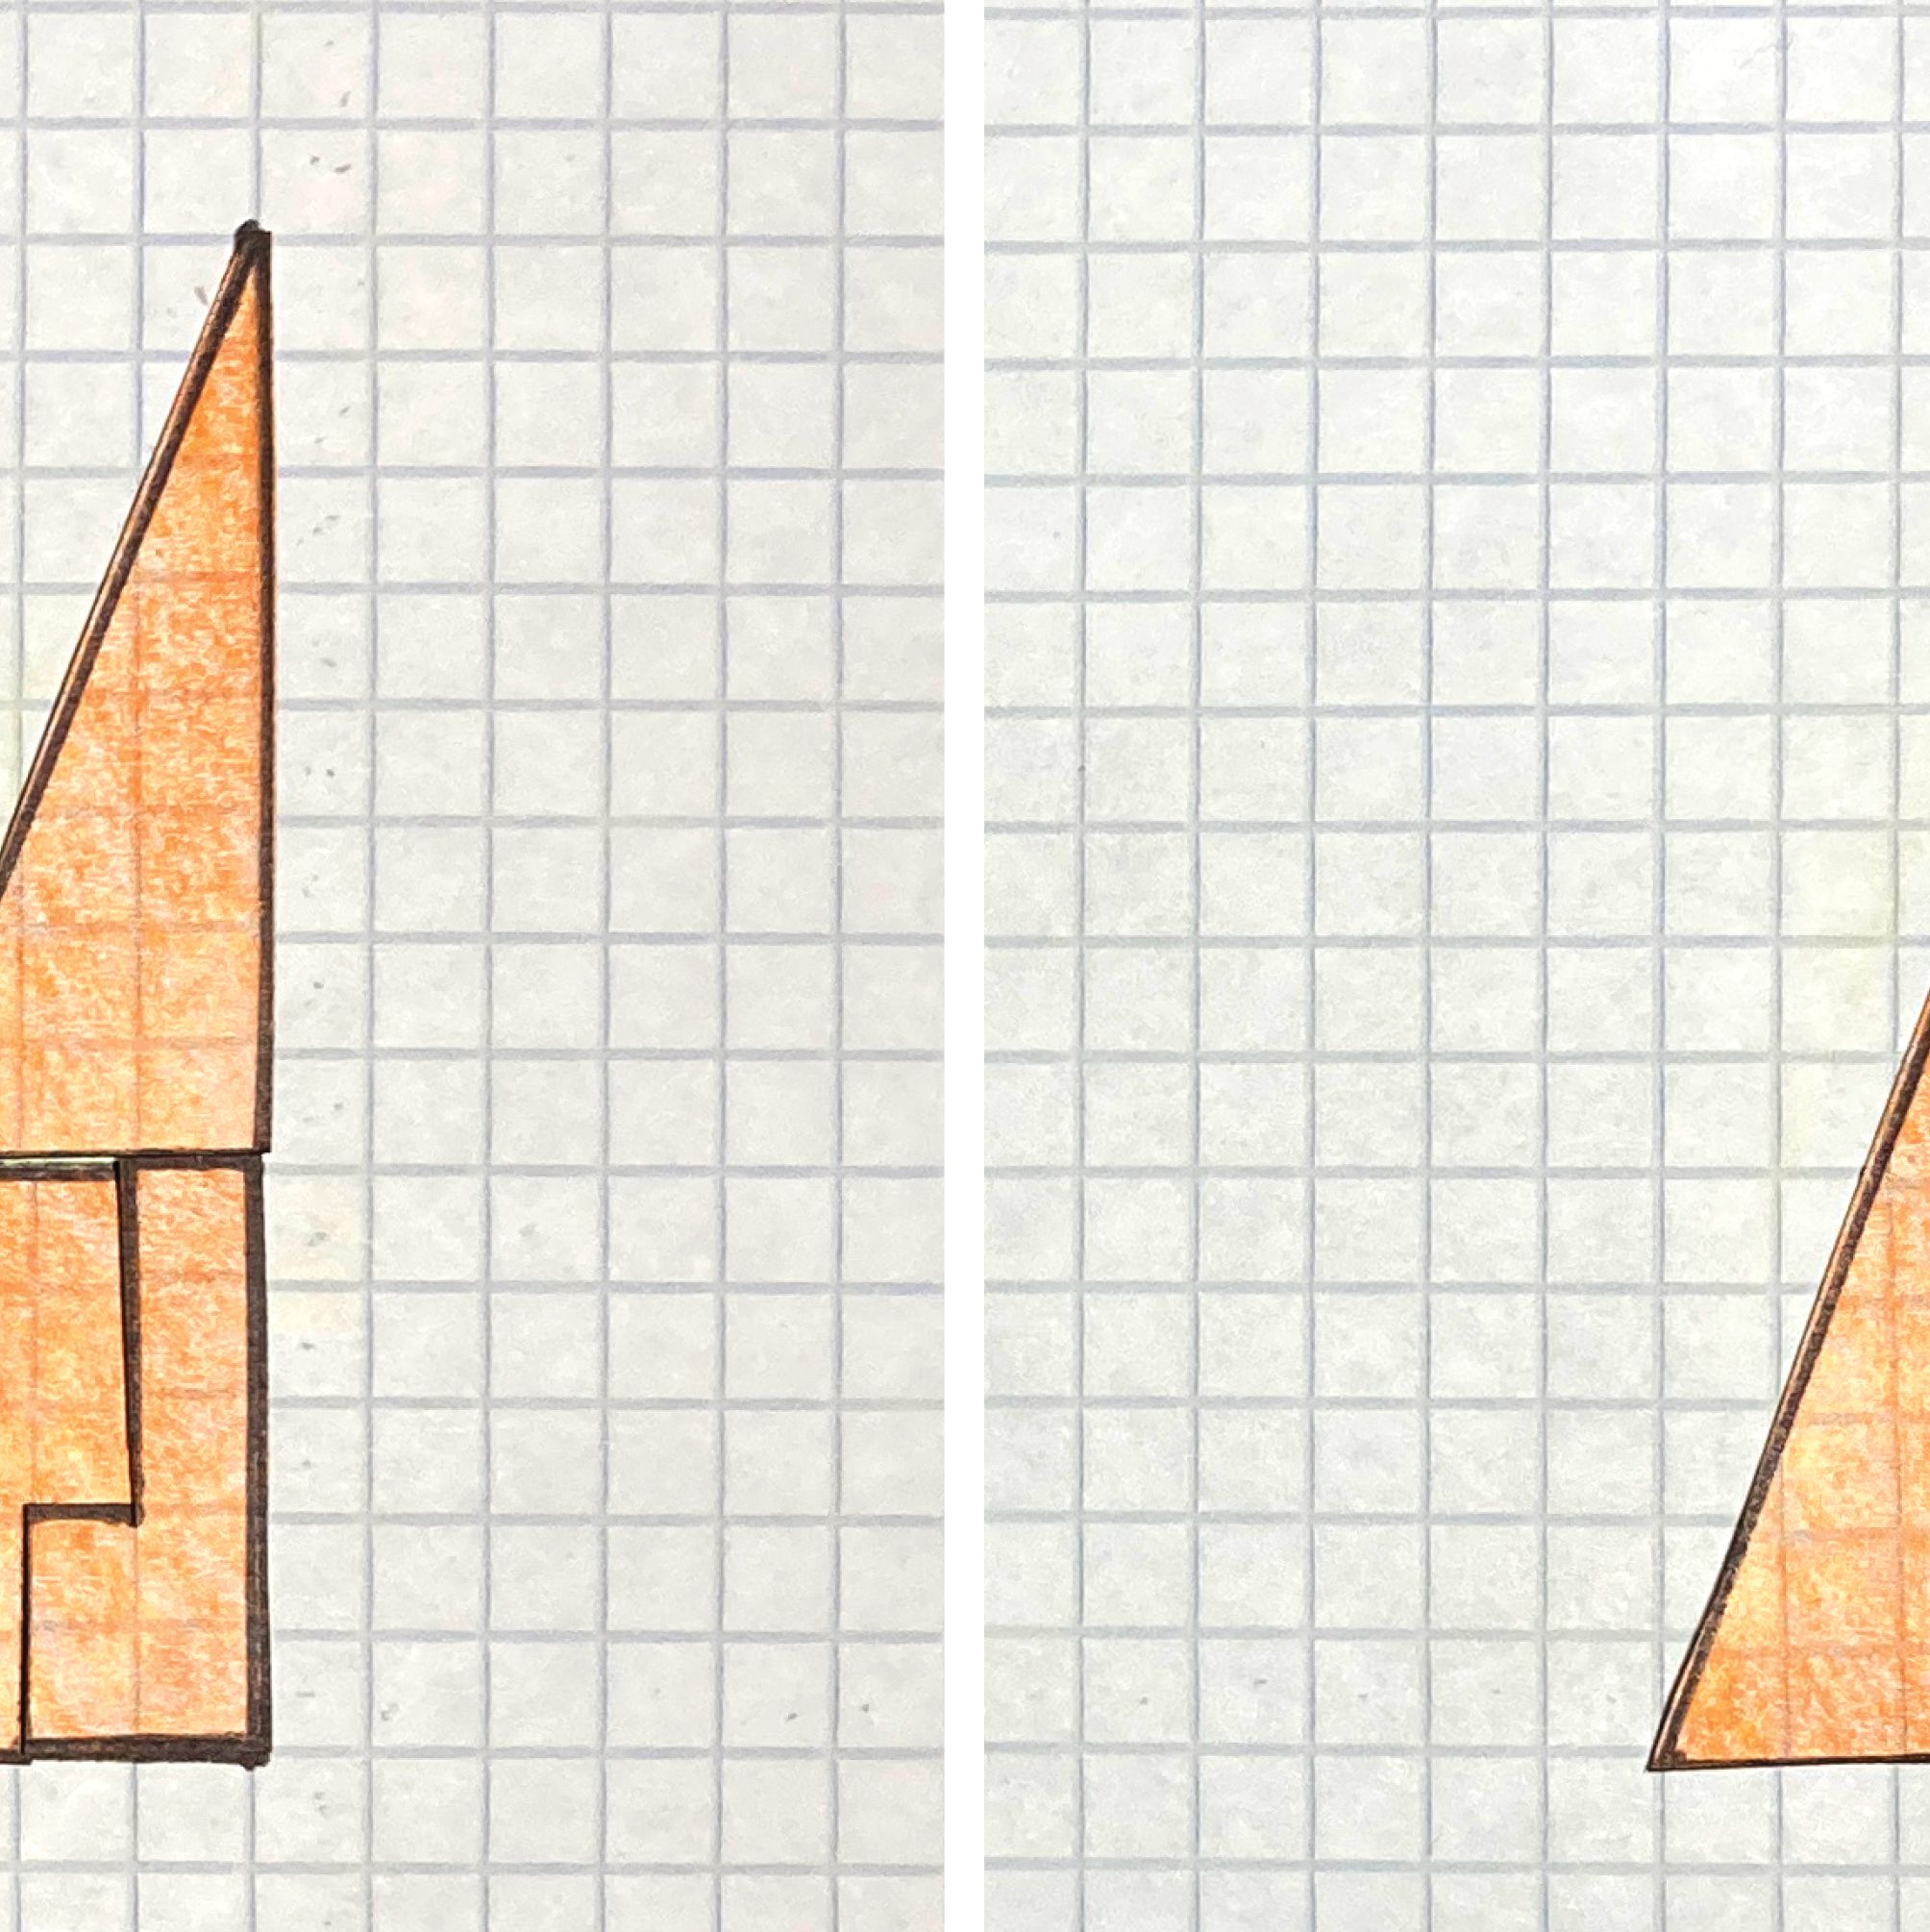 The 'Missing Square Puzzle' Is Completely Mesmerizing. Can You Solve It?